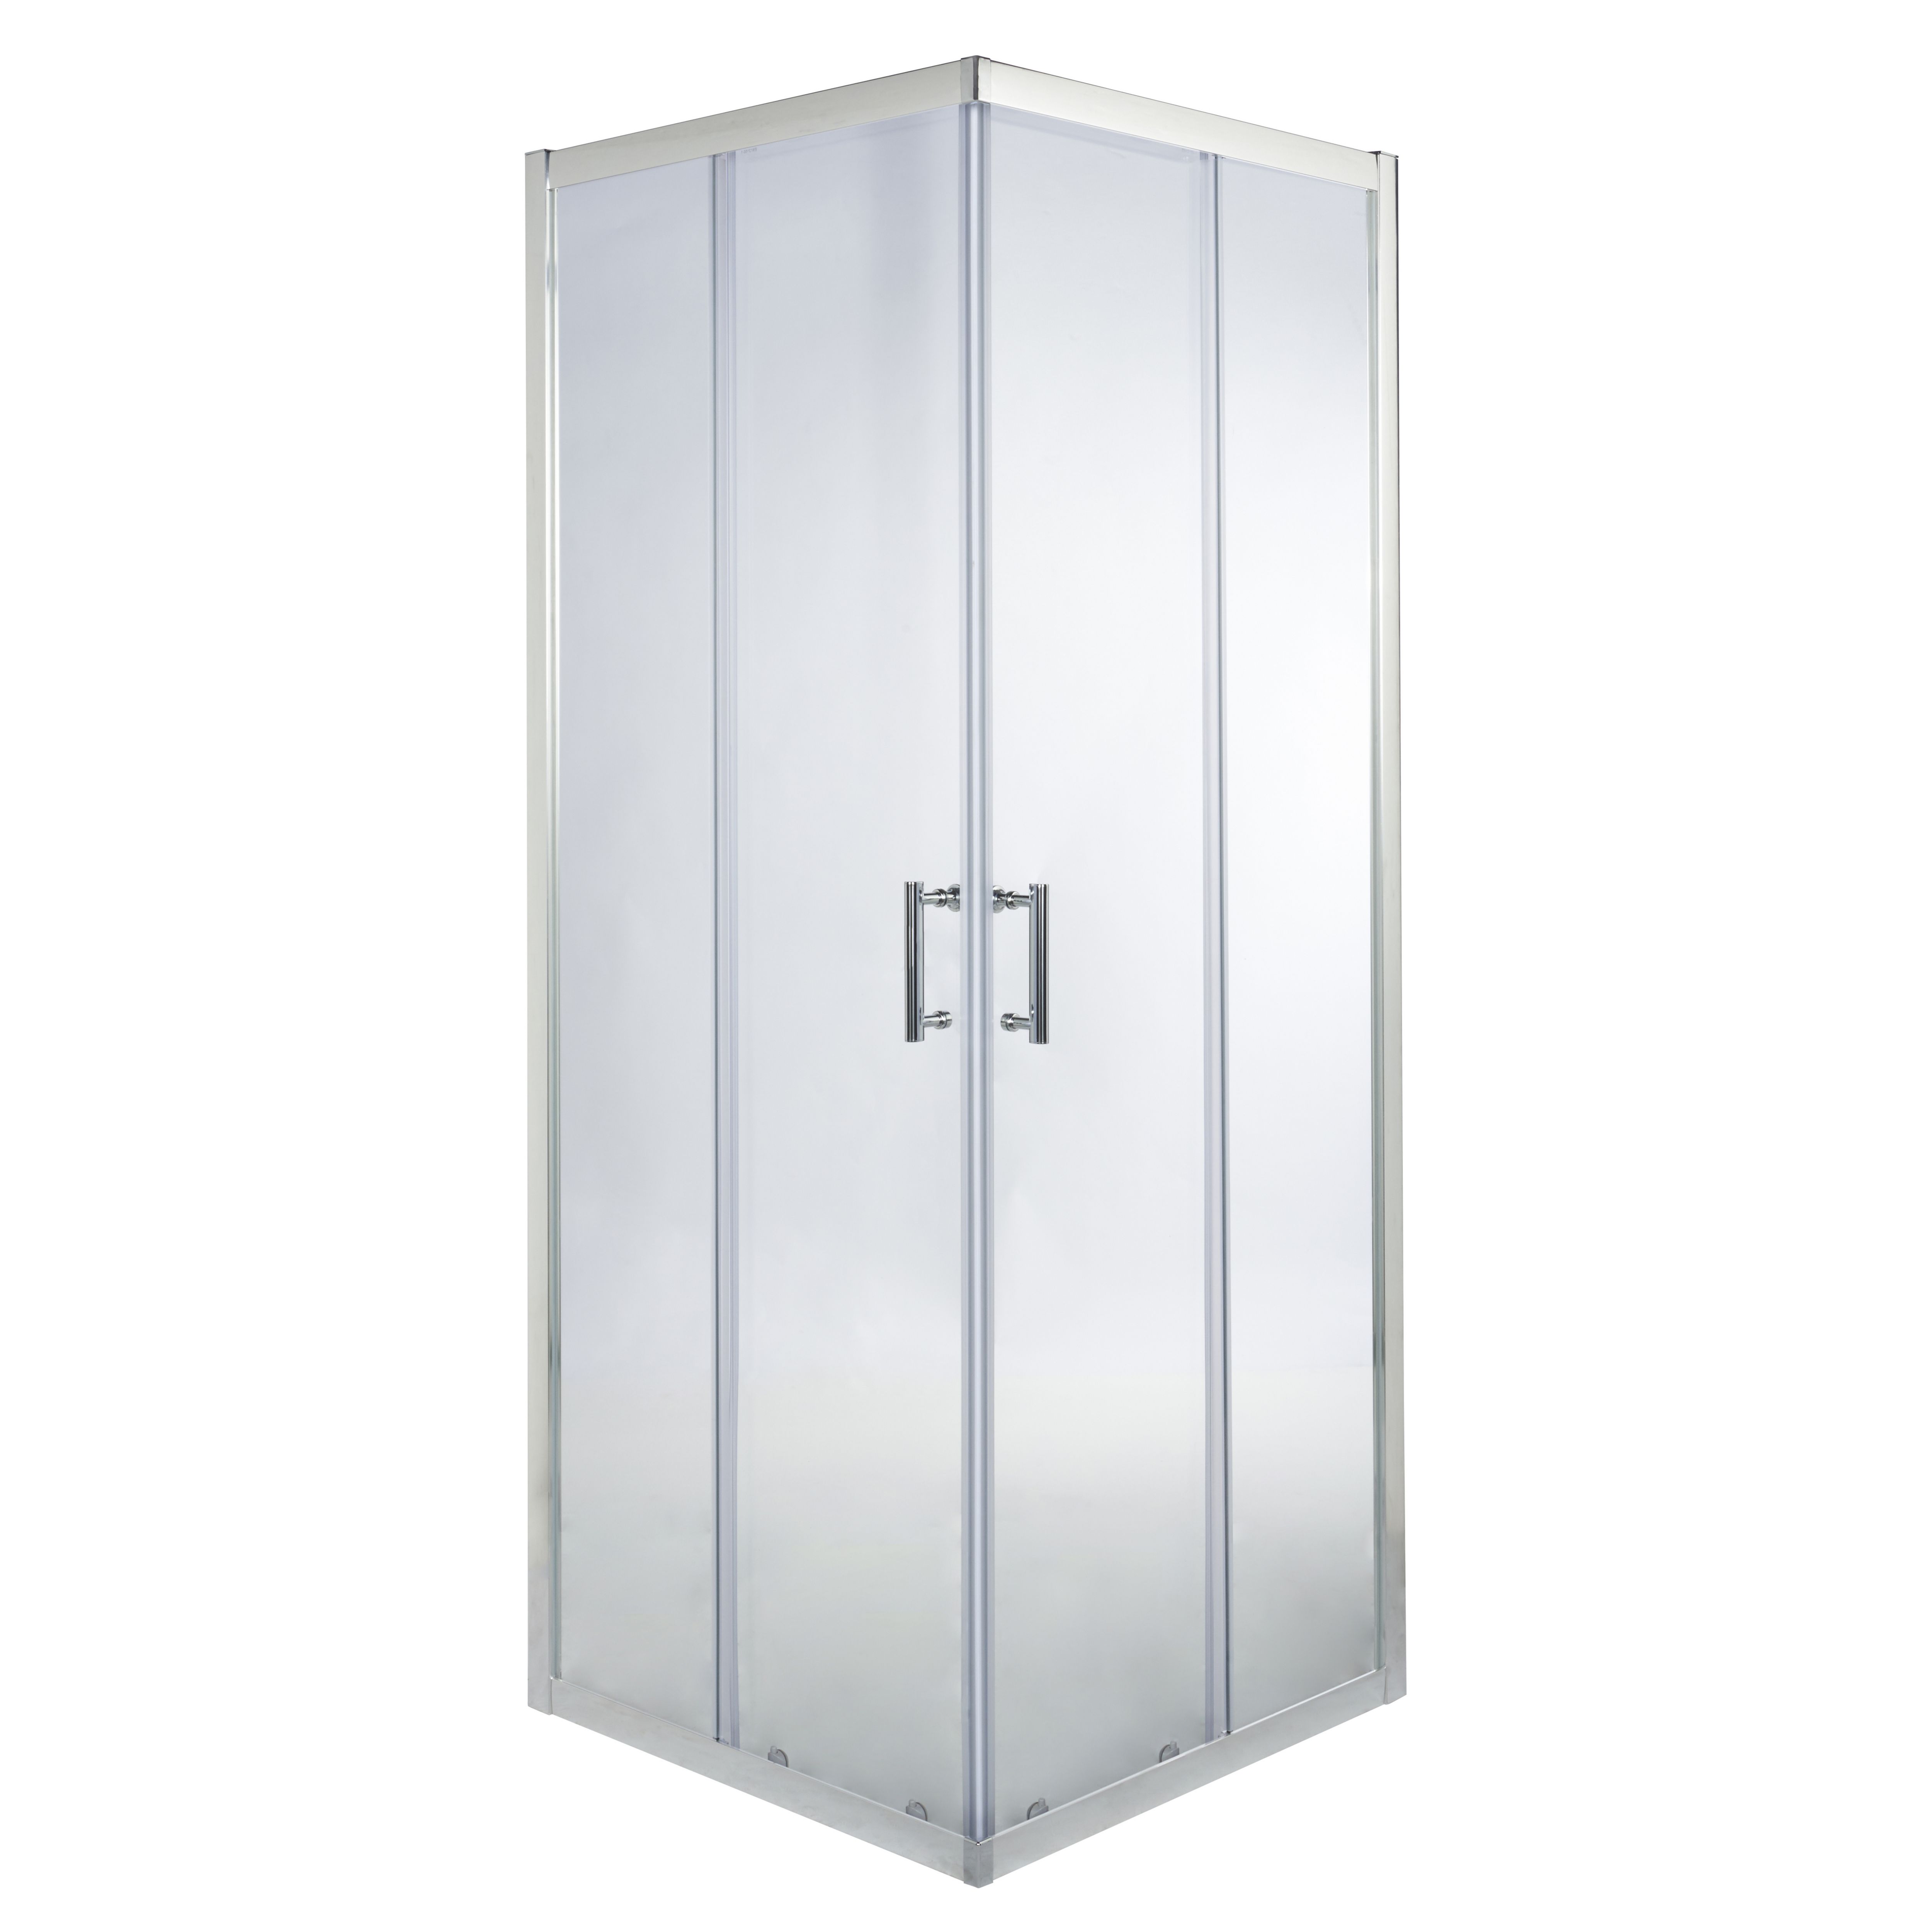 GoodHome Onega Silver effect Square Shower Enclosure & tray with Corner entry double sliding door (H)190cm (W)80cm (D)80cm